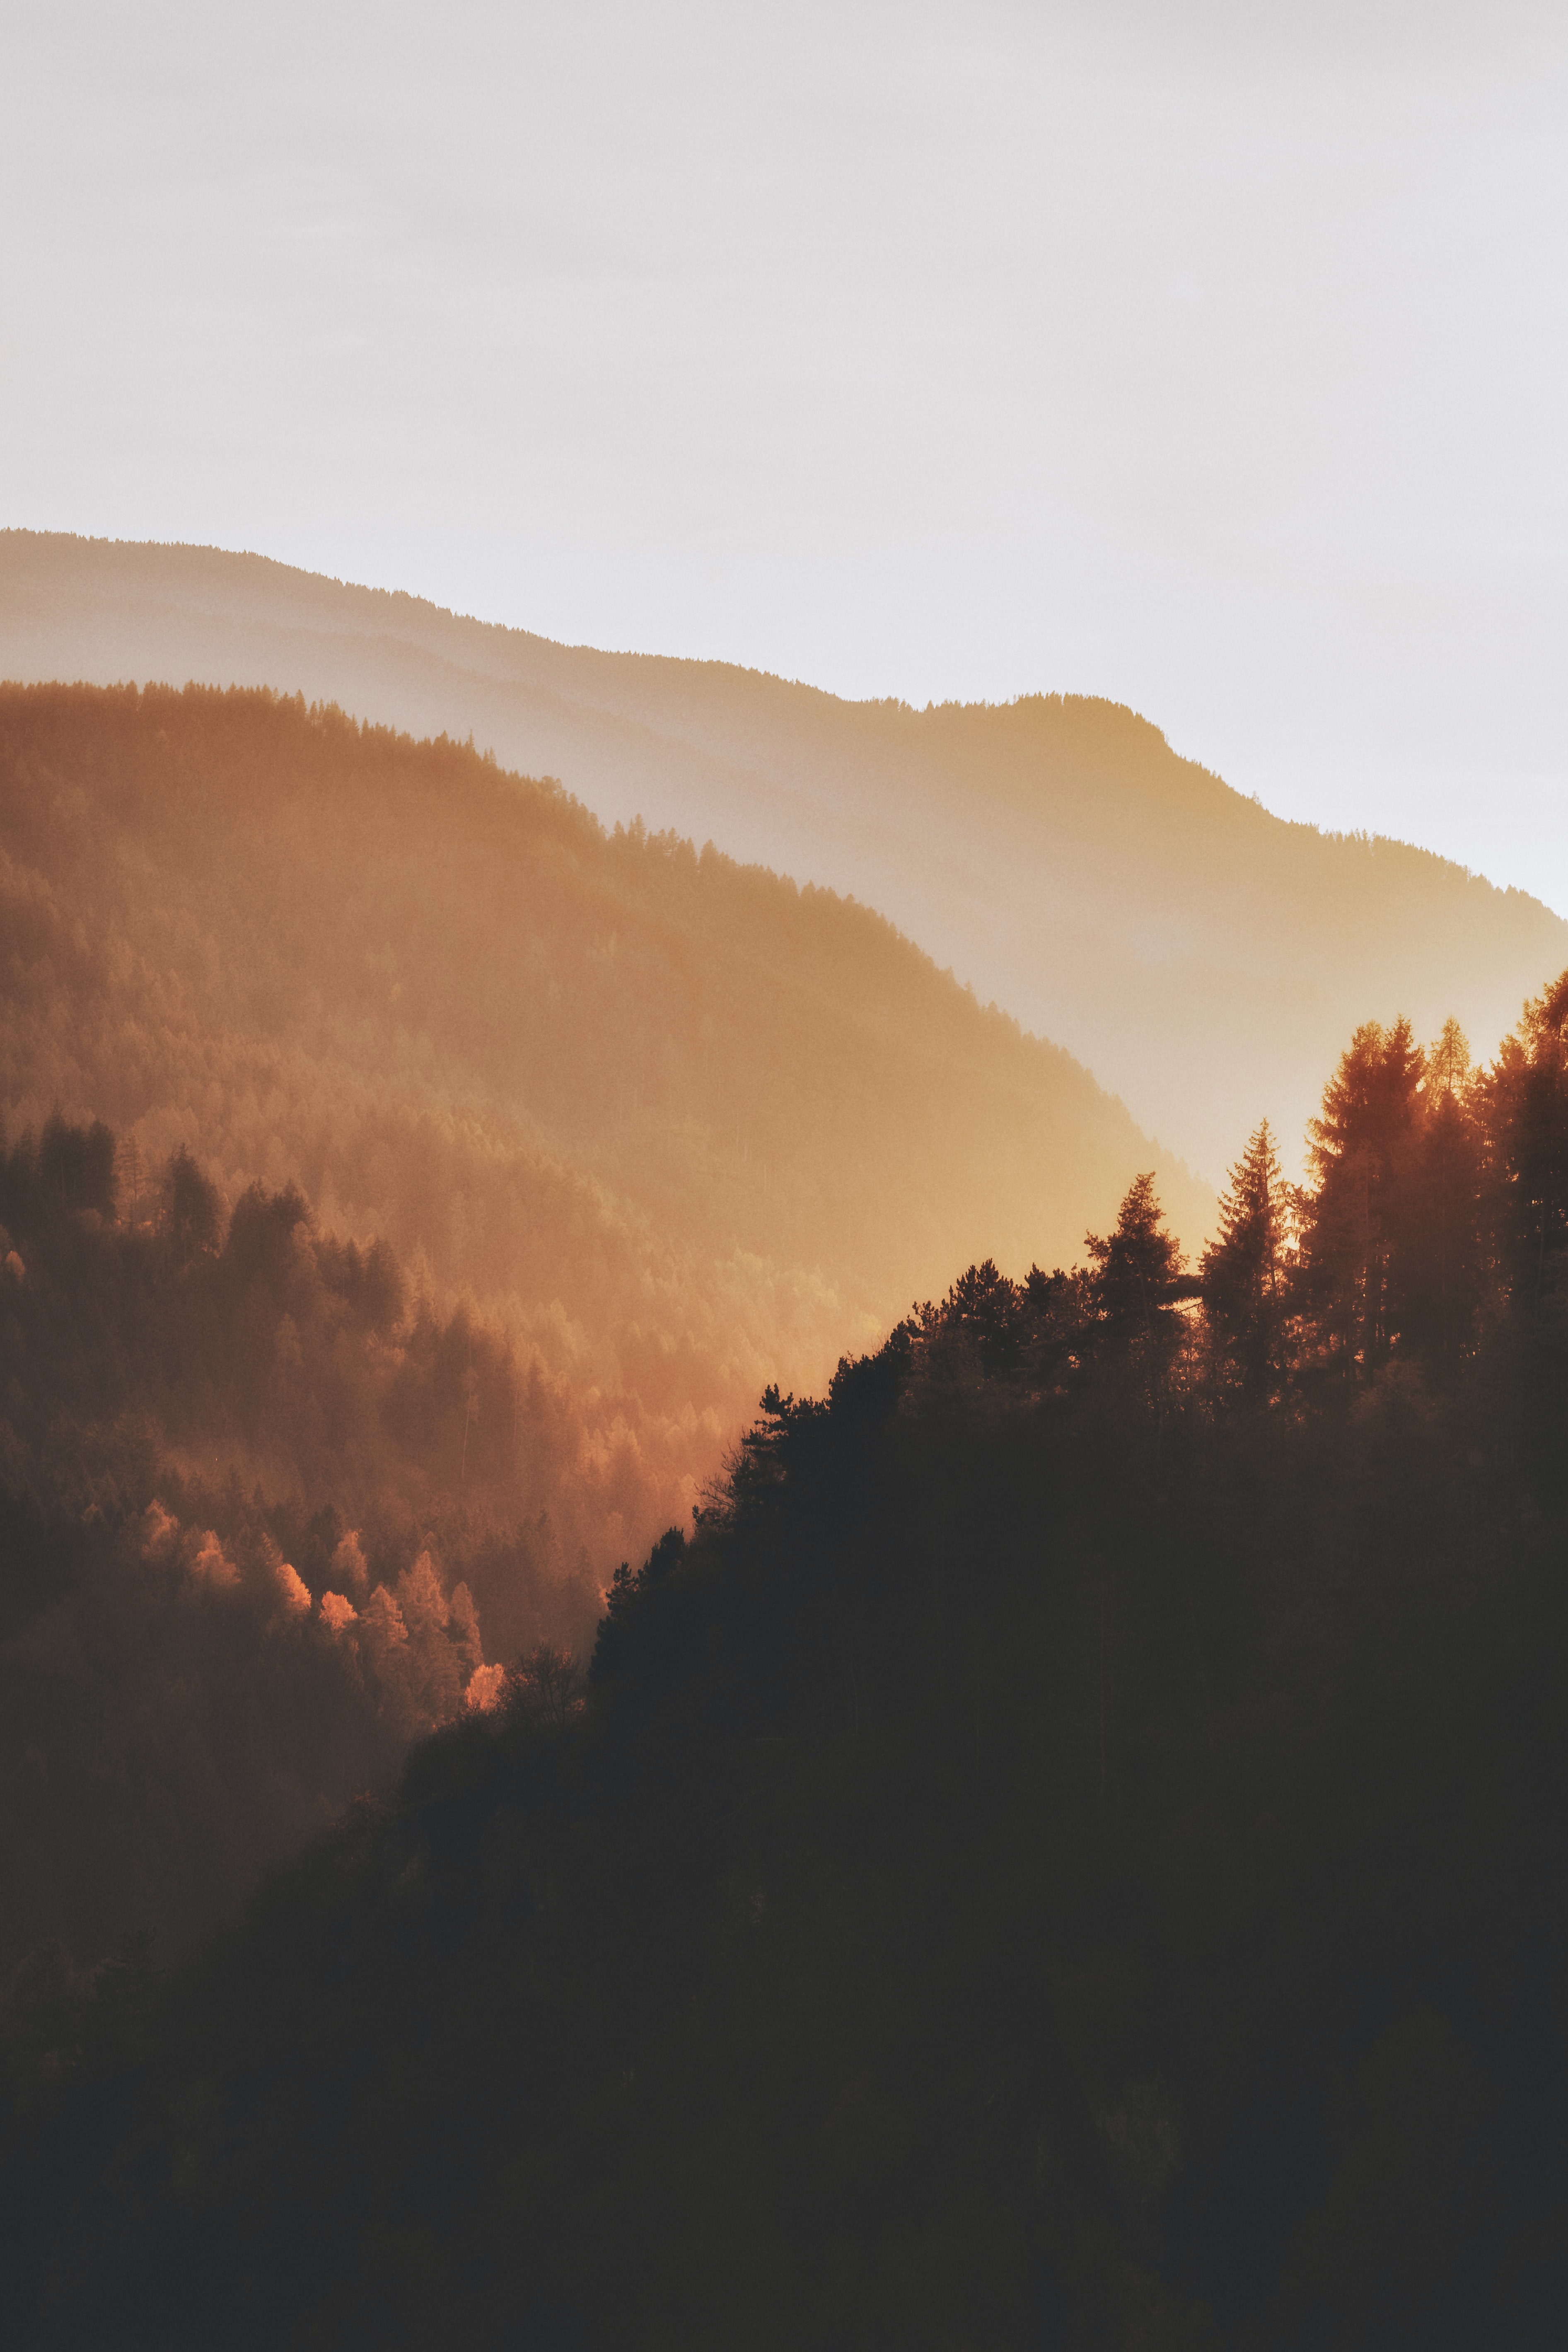 android sunset, hills, nature, trees, forest